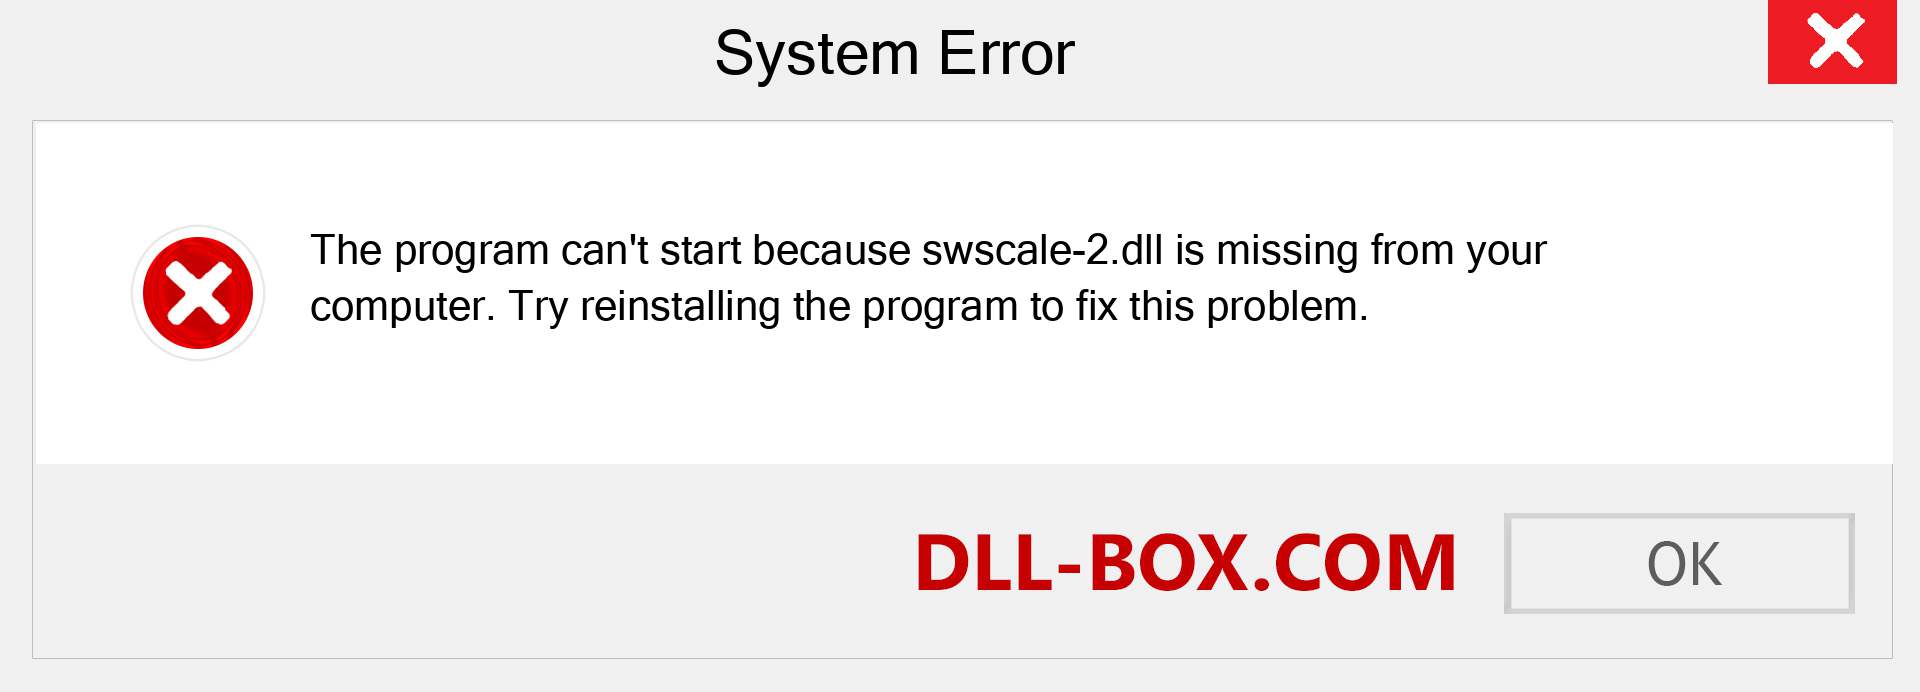  swscale-2.dll file is missing?. Download for Windows 7, 8, 10 - Fix  swscale-2 dll Missing Error on Windows, photos, images